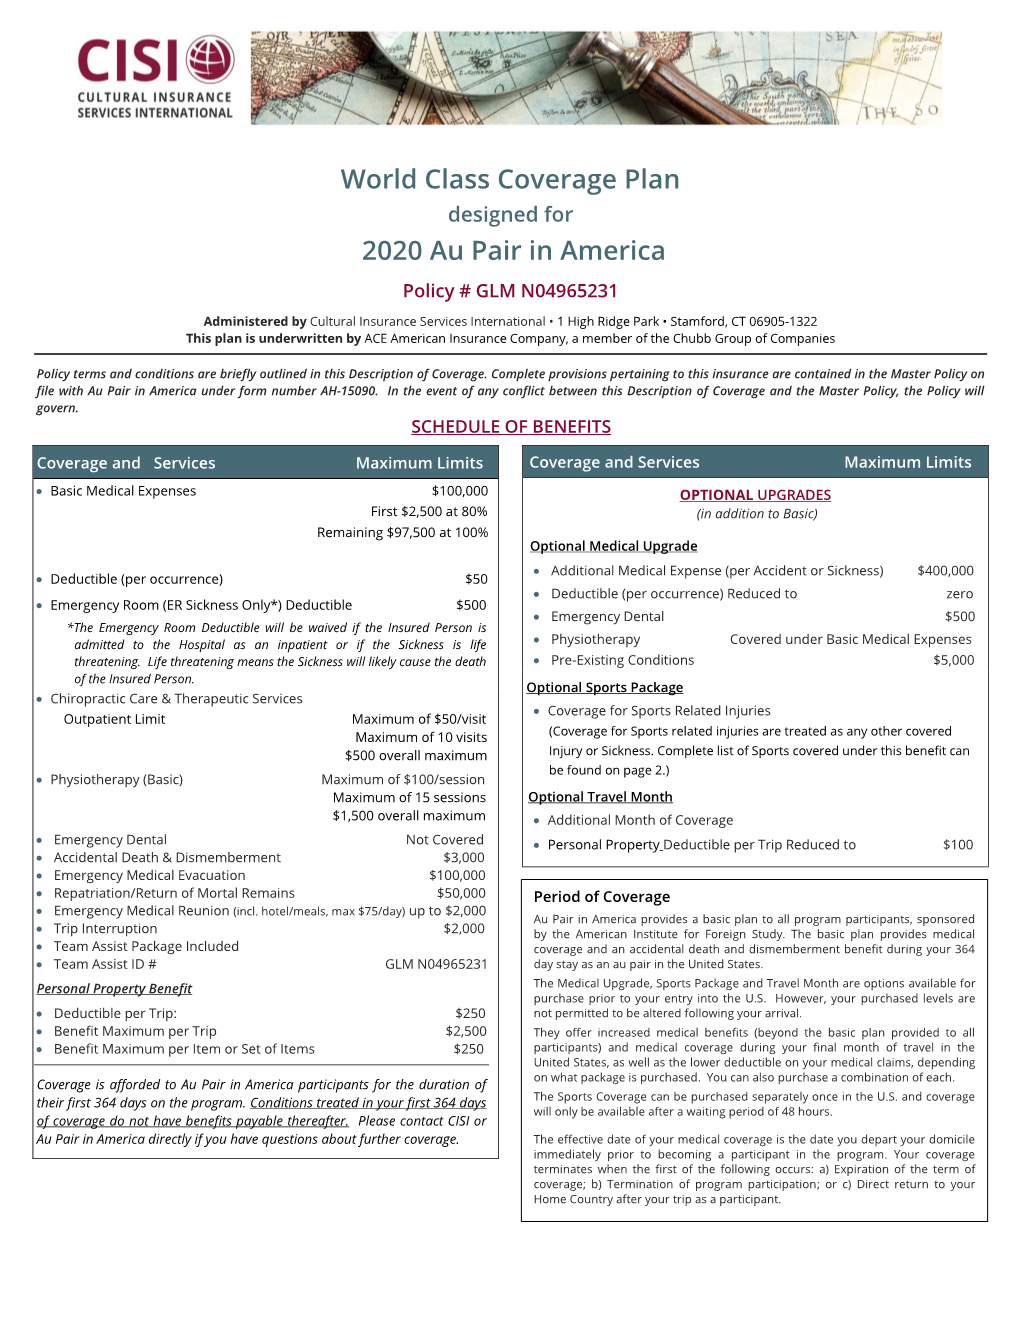 World Class Coverage Plan Designed for 2020 Au Pair in America Policy # GLM N04965231